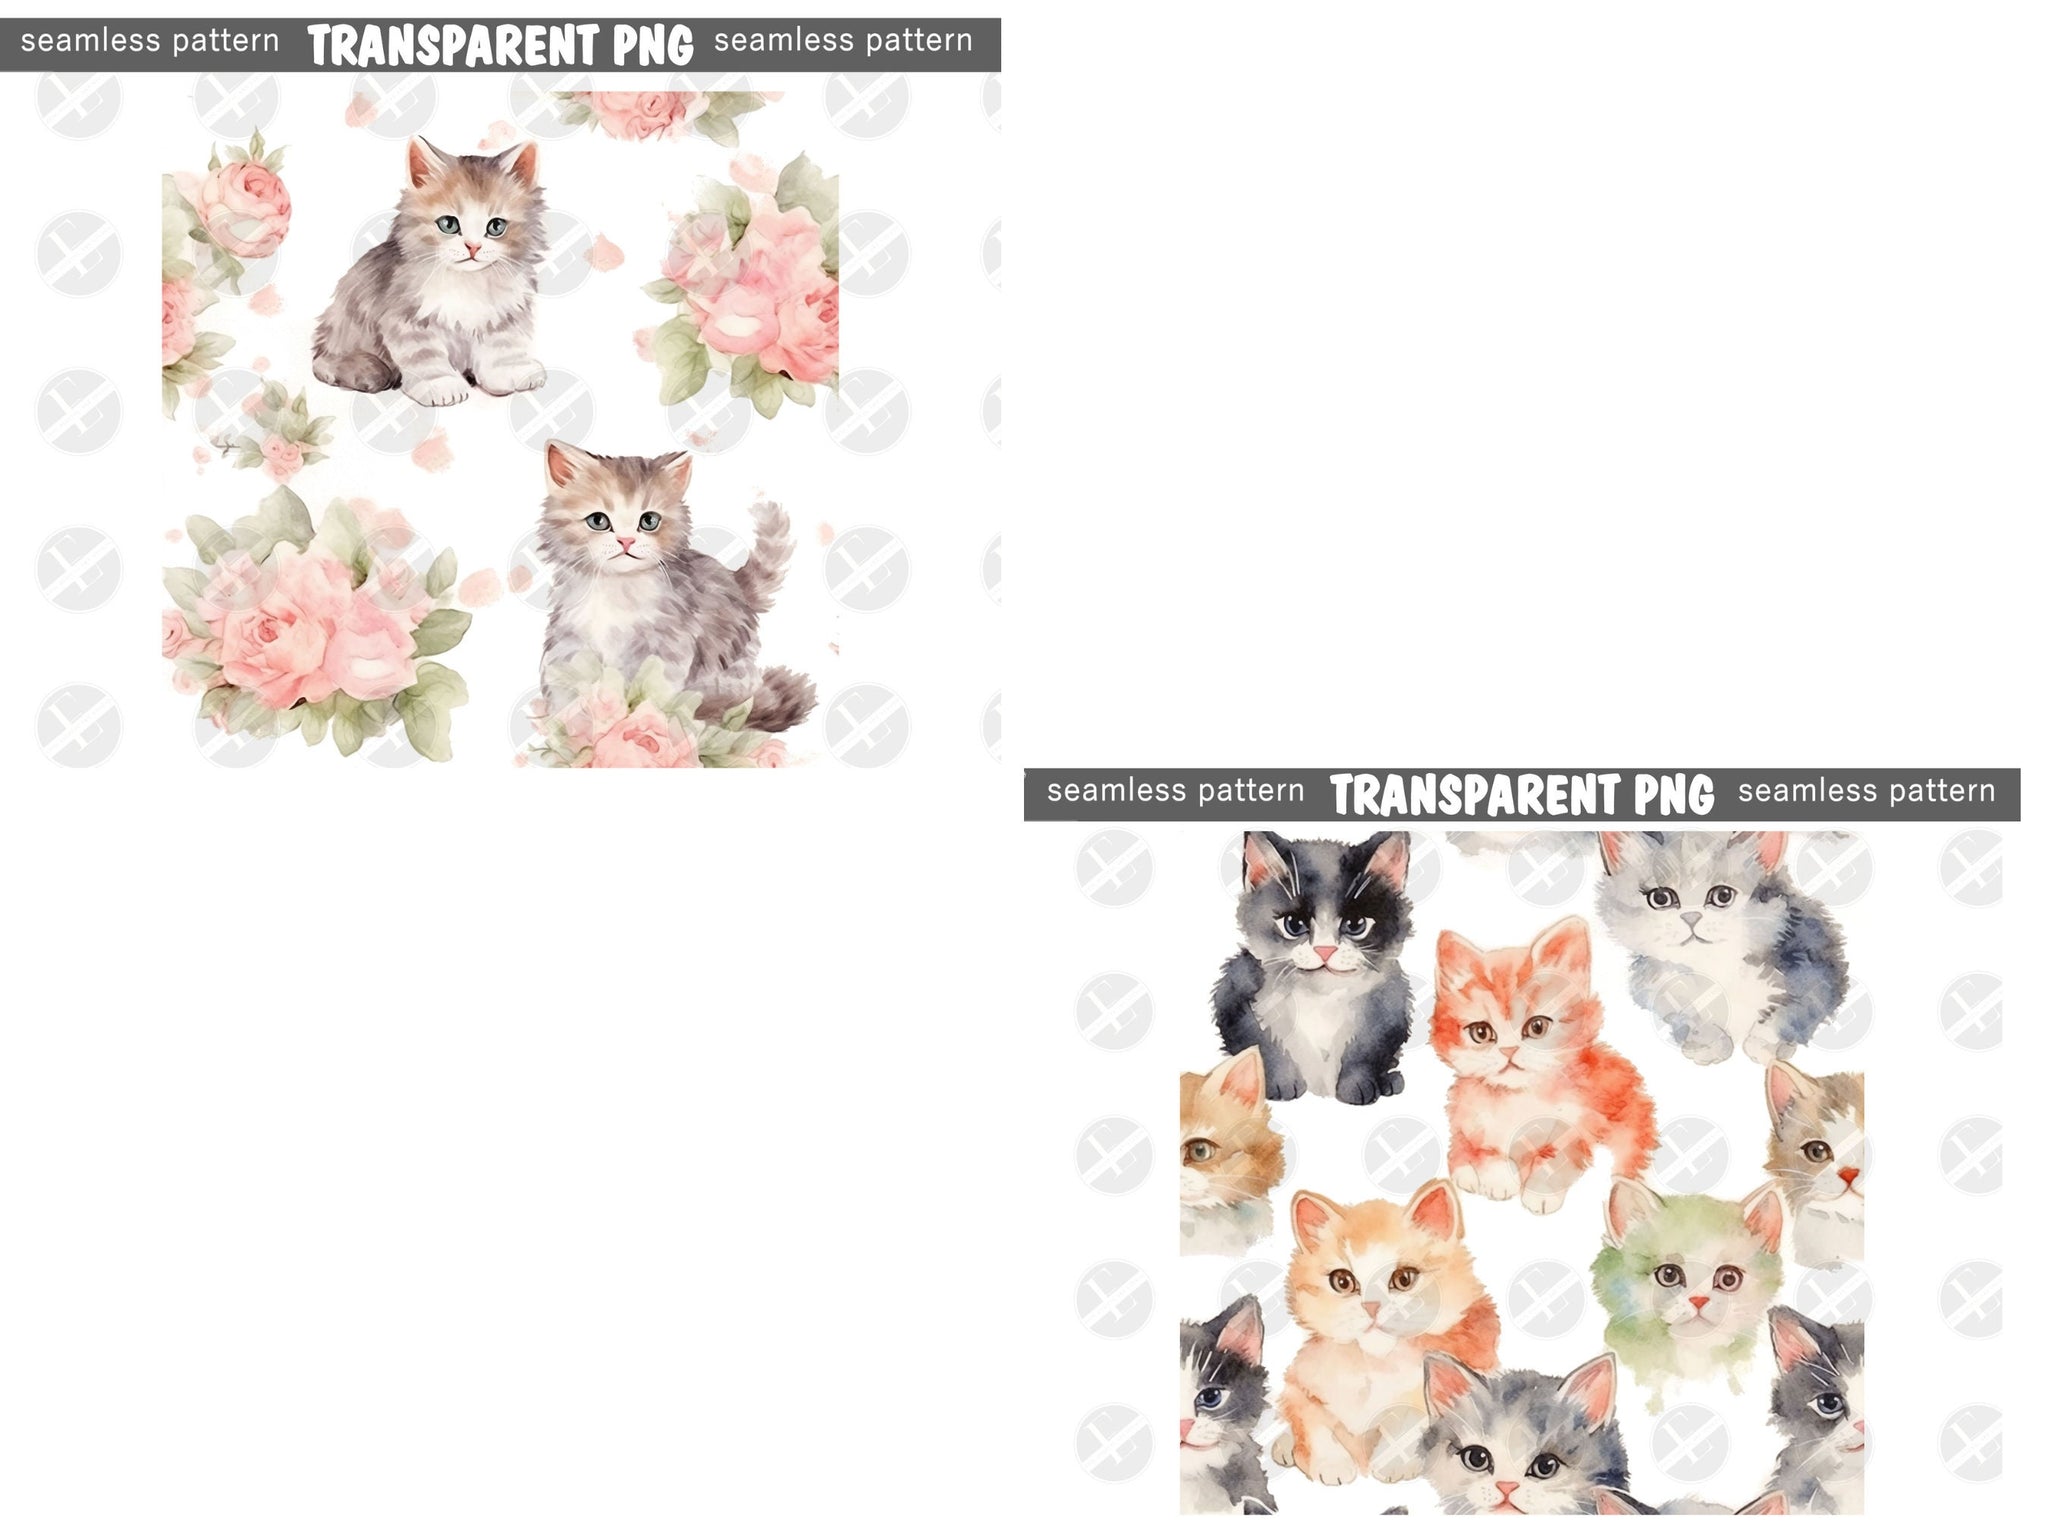 Cat Seamless Patterns Digital Download PNG - Bundle of 10 - Shabby Chic Vintage Soft Watercolor Kittens Patterns - Commercial & Personal Use